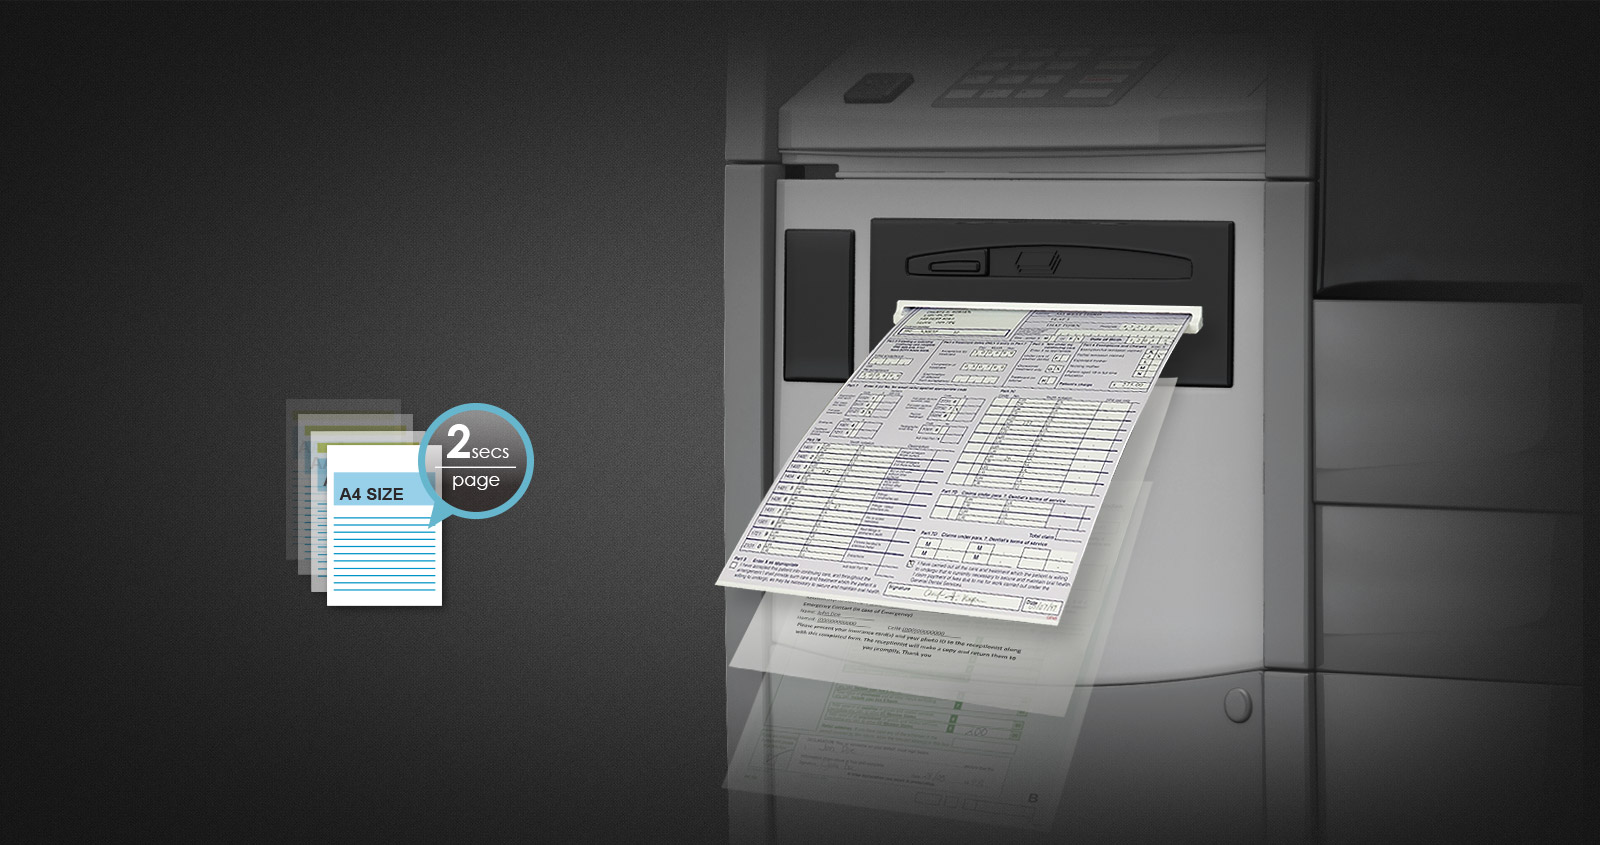 High-speed scanning ensures the workflow and efficiency